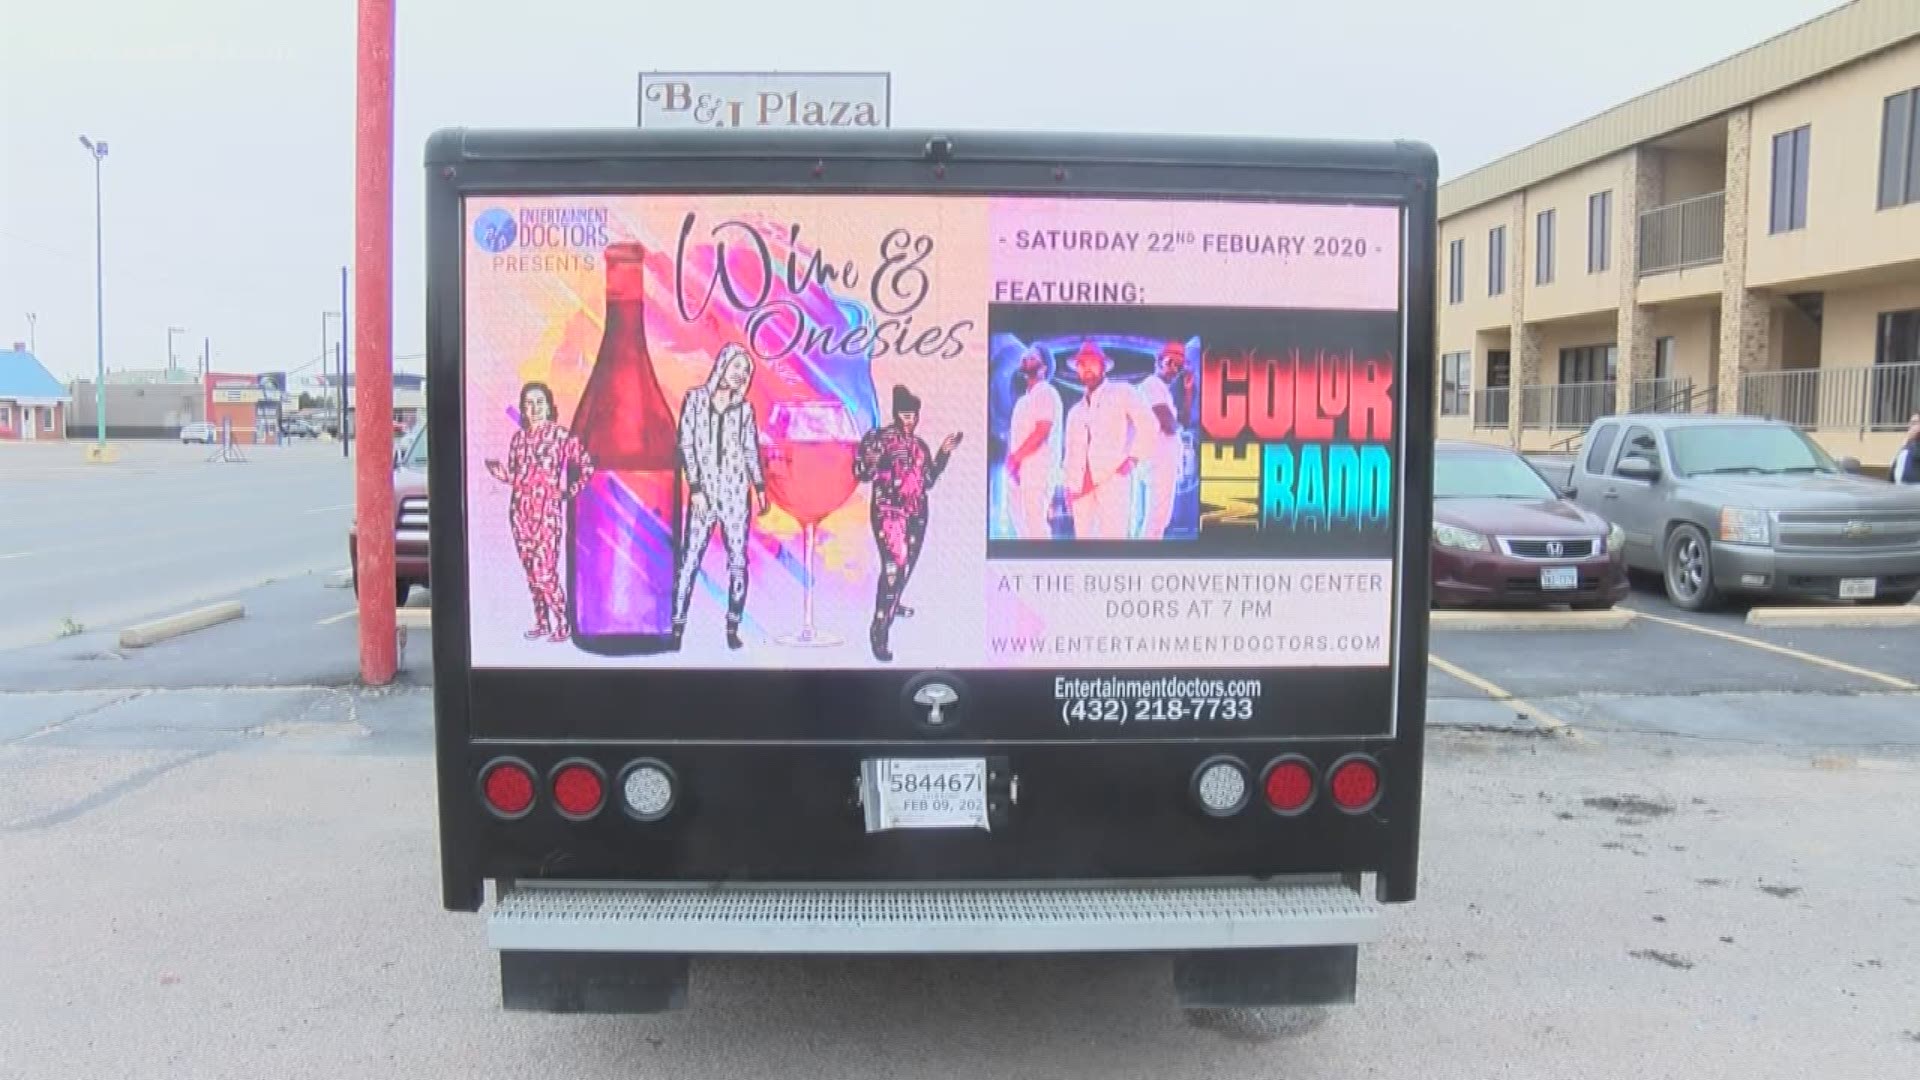 Entertainment Doctor incorporated a truck to promote shows then ventured off in the marketing and advertising business.